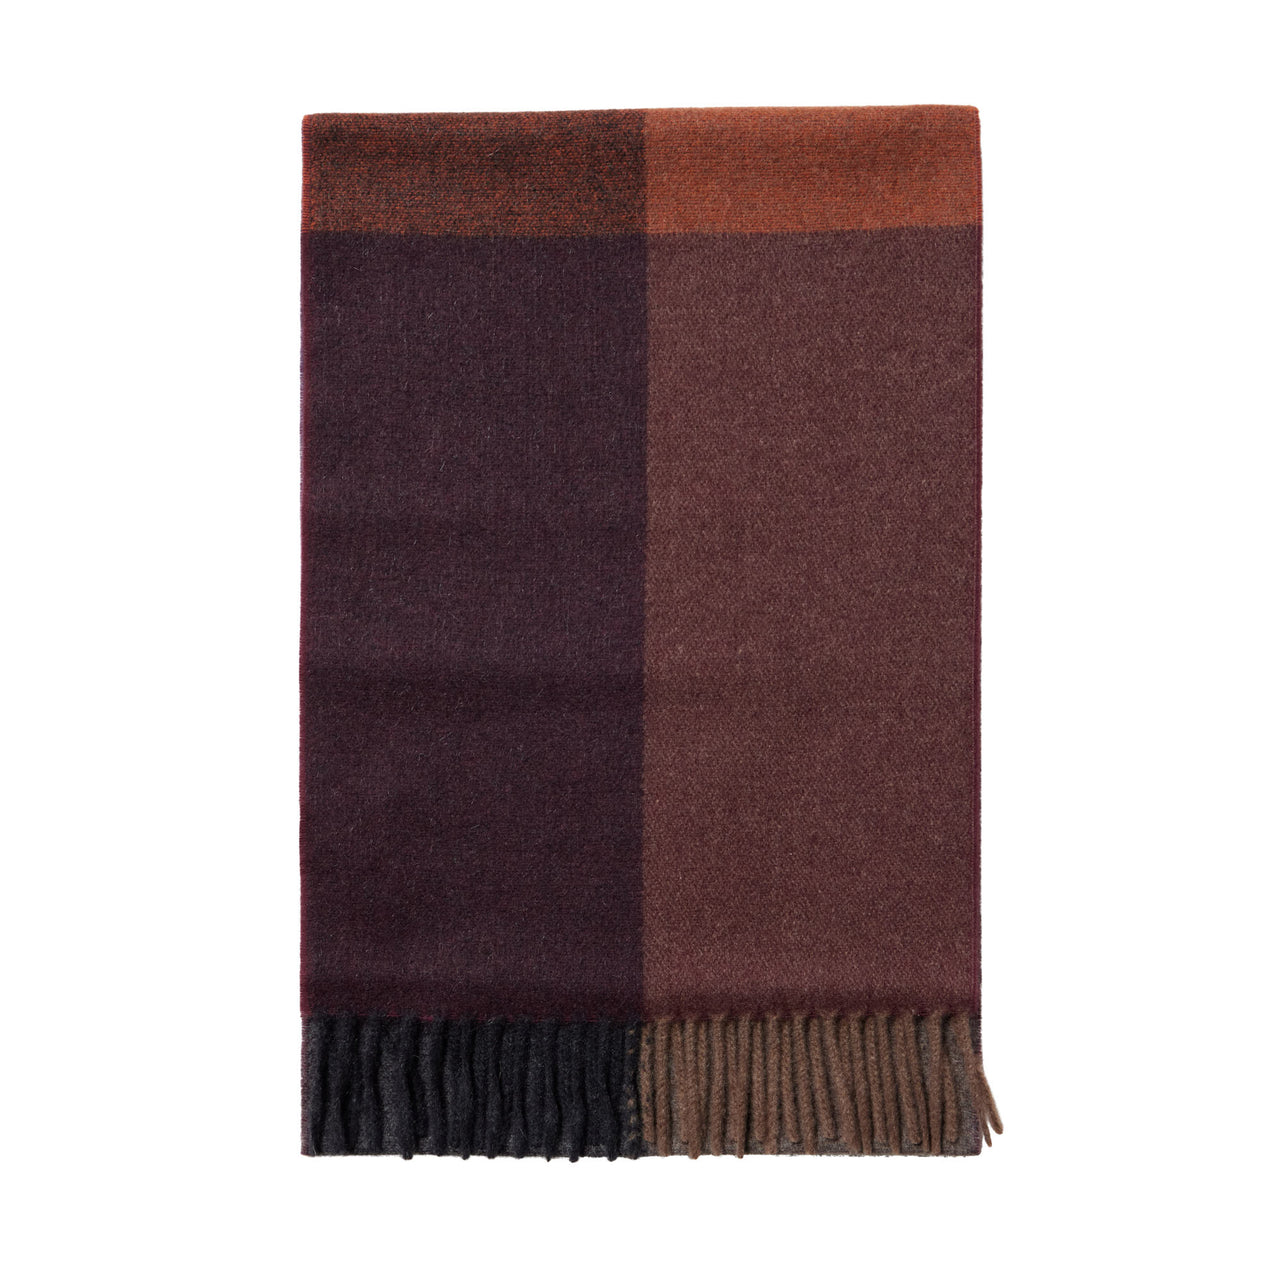 HENRY SARTORIAL X CANTINI Cashmere Scarf MULTI